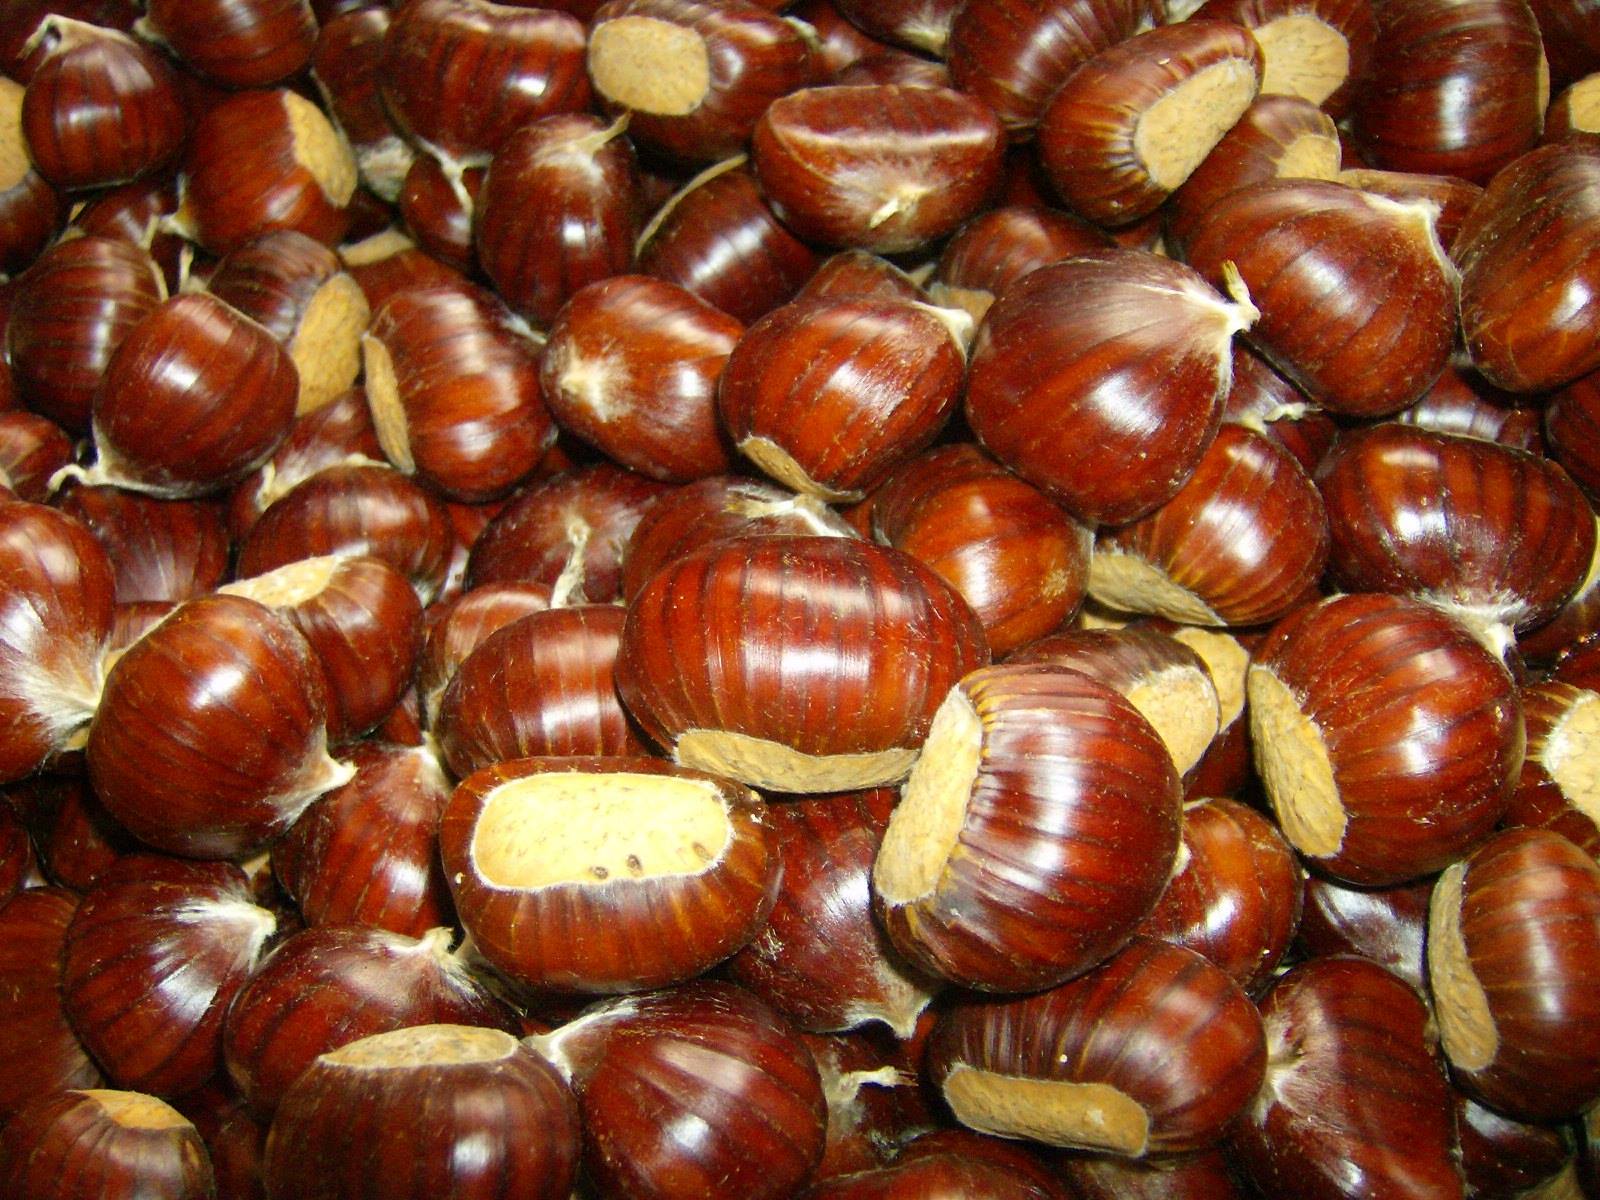 Chestnuts, typical products of autumn in Tuscany